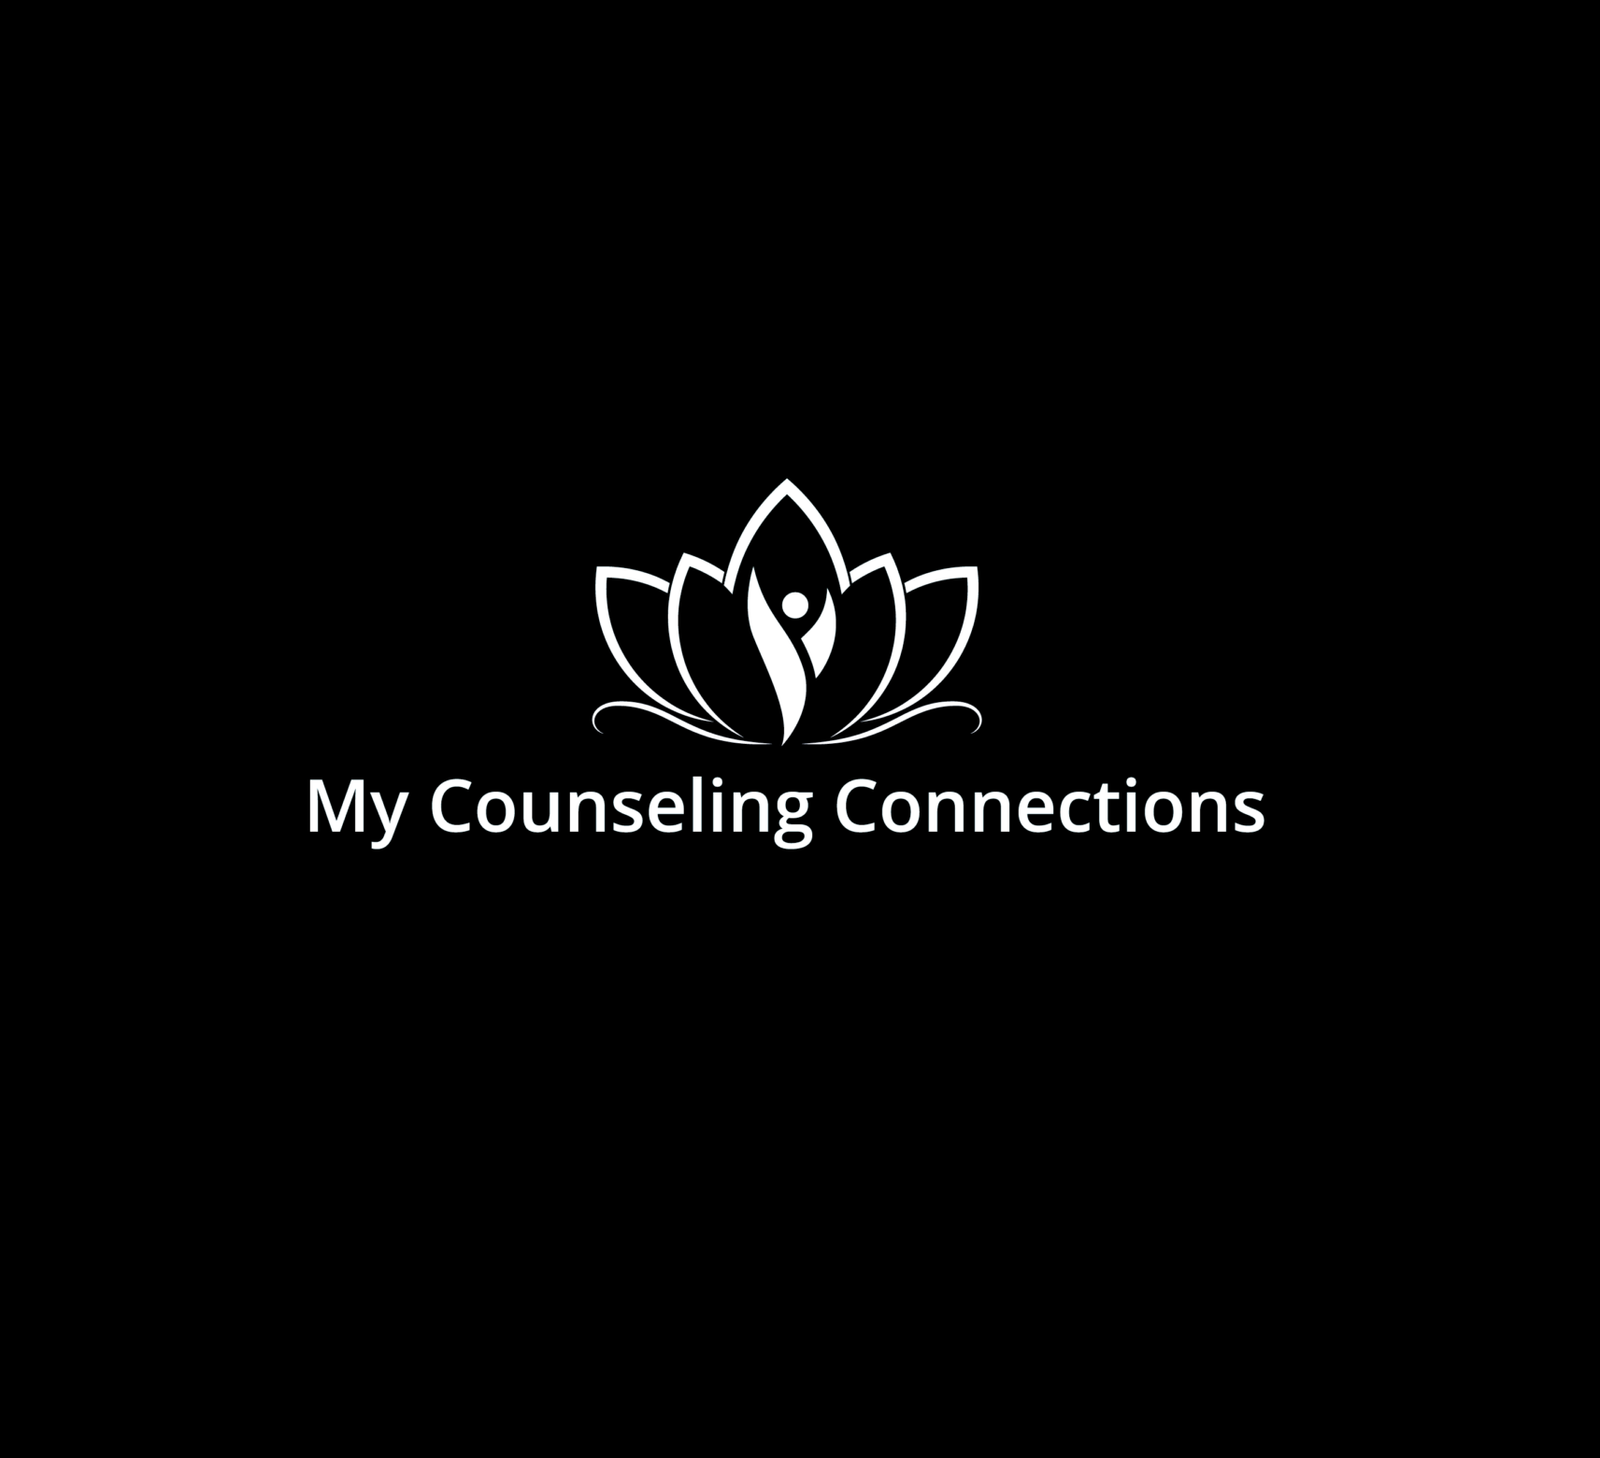 mycounselingconnections